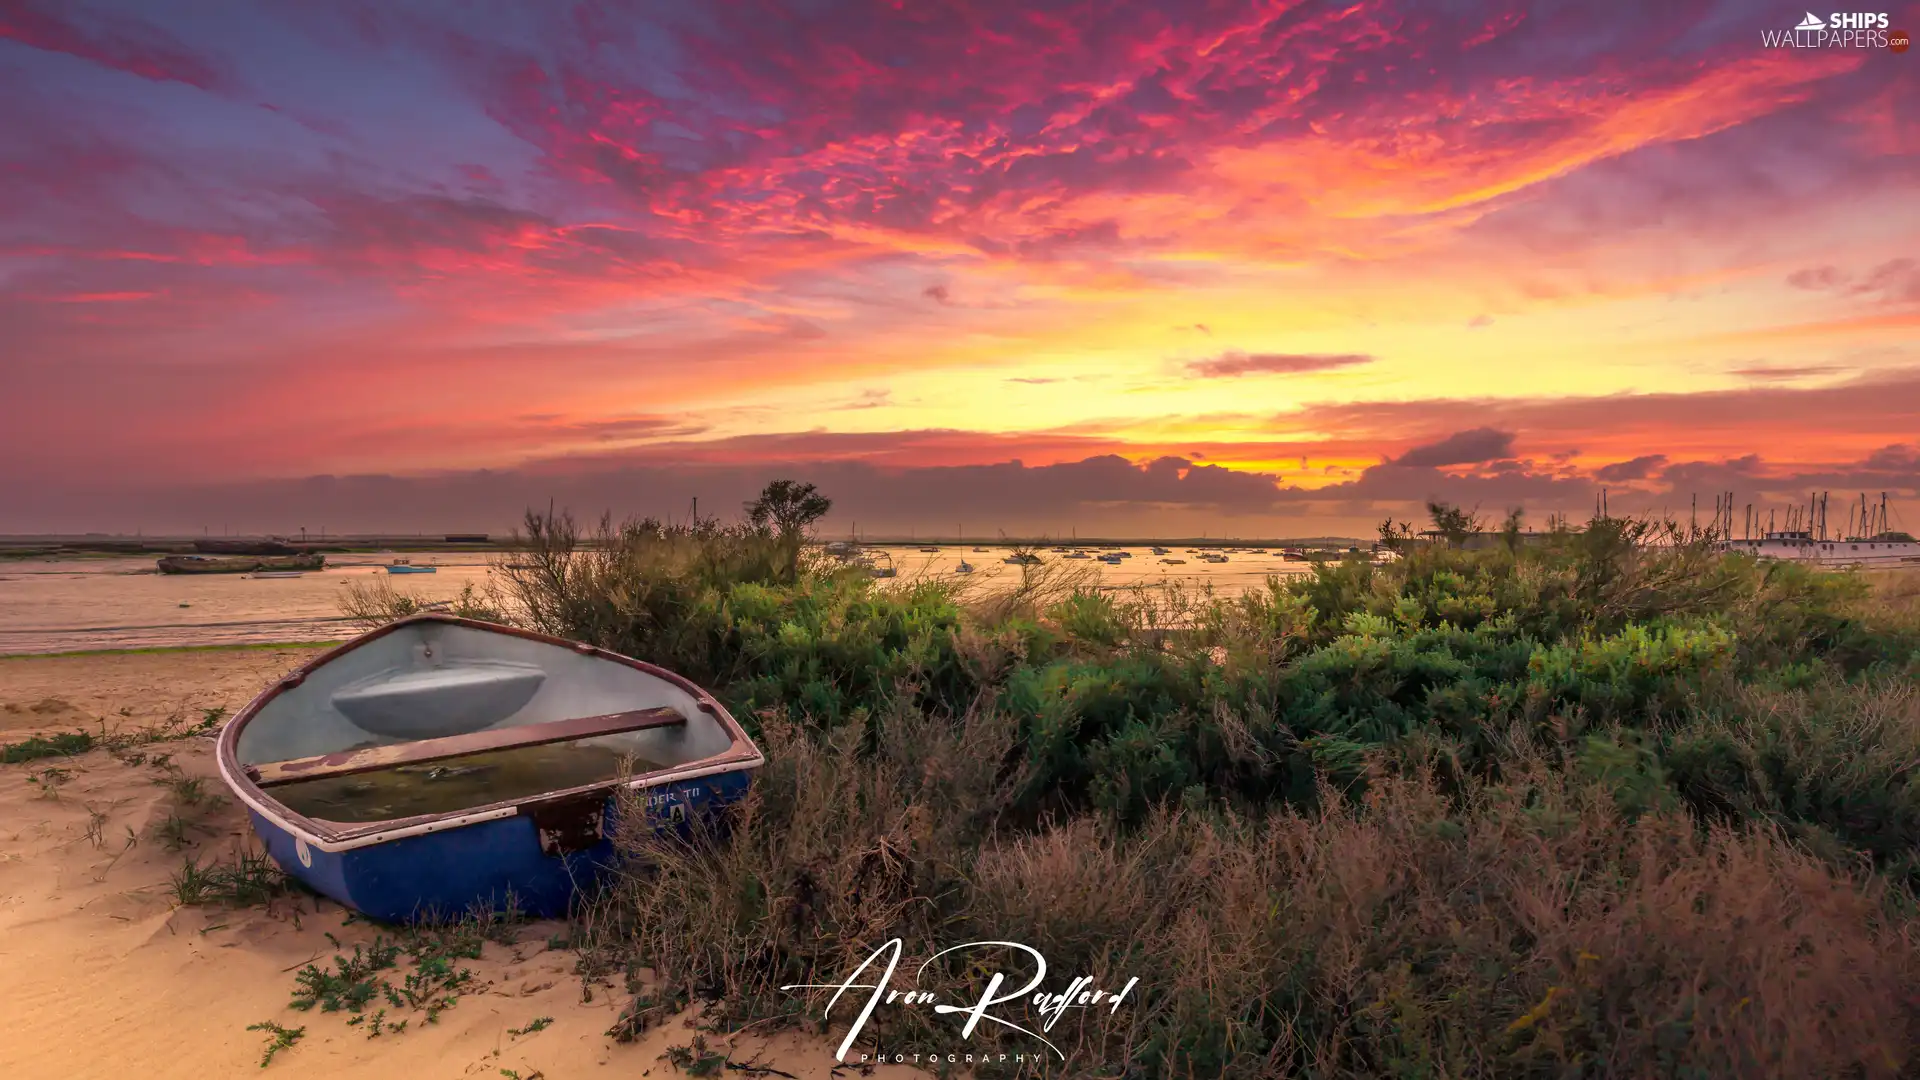 grass, Boat, clouds, Beaches, sea, Bush, Great Sunsets